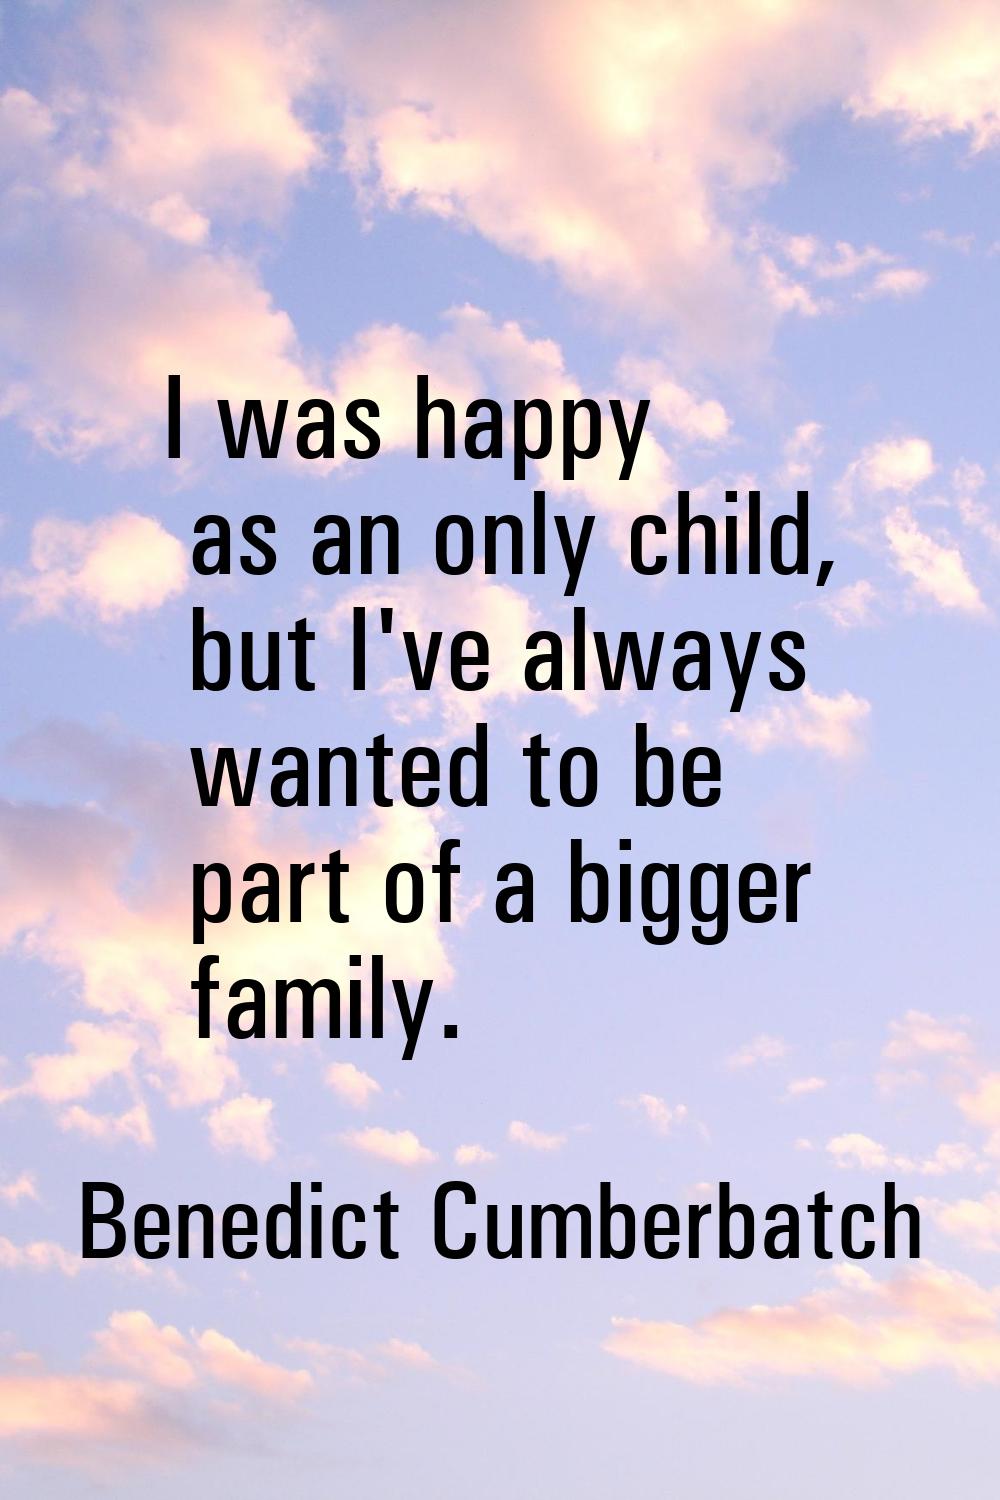 I was happy as an only child, but I've always wanted to be part of a bigger family.